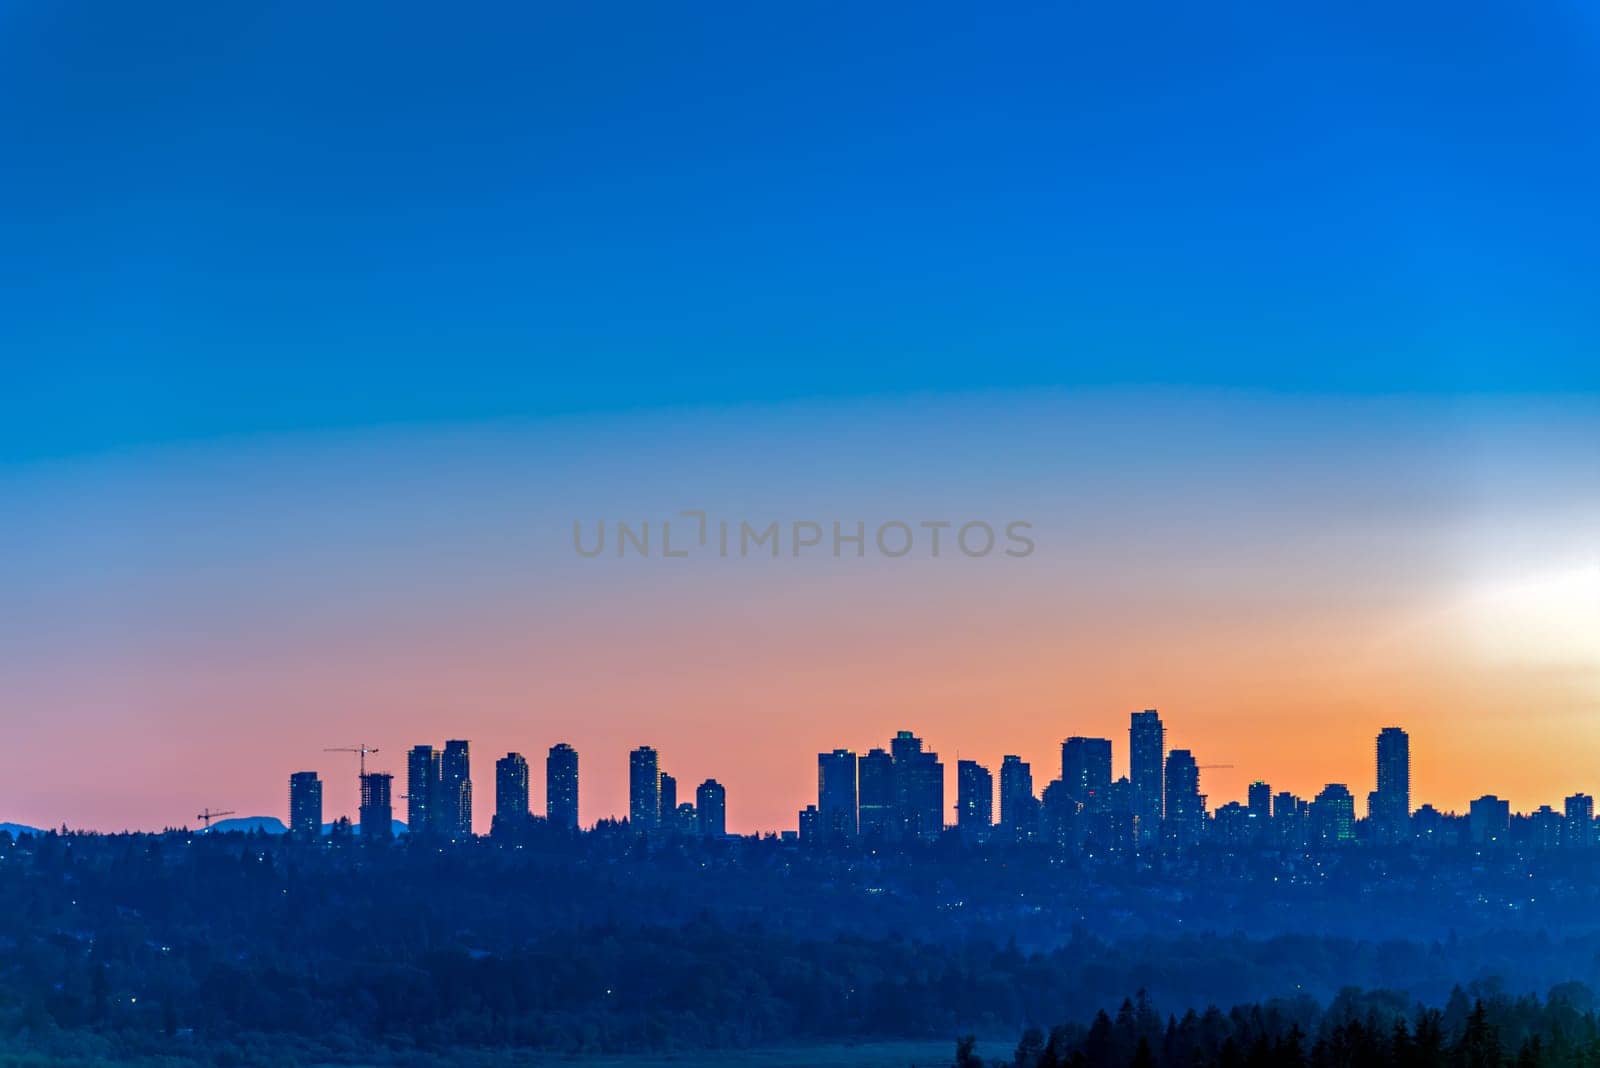 Metrotown district on sunset sky background by Imagenet